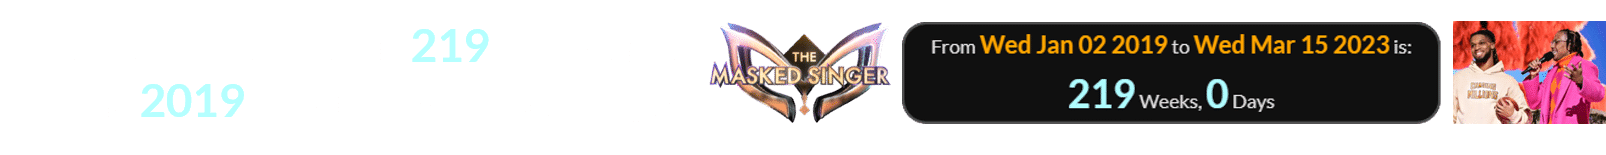 March 15th was exactly 219 weeks after the 2019 debut of The Masked Singer: